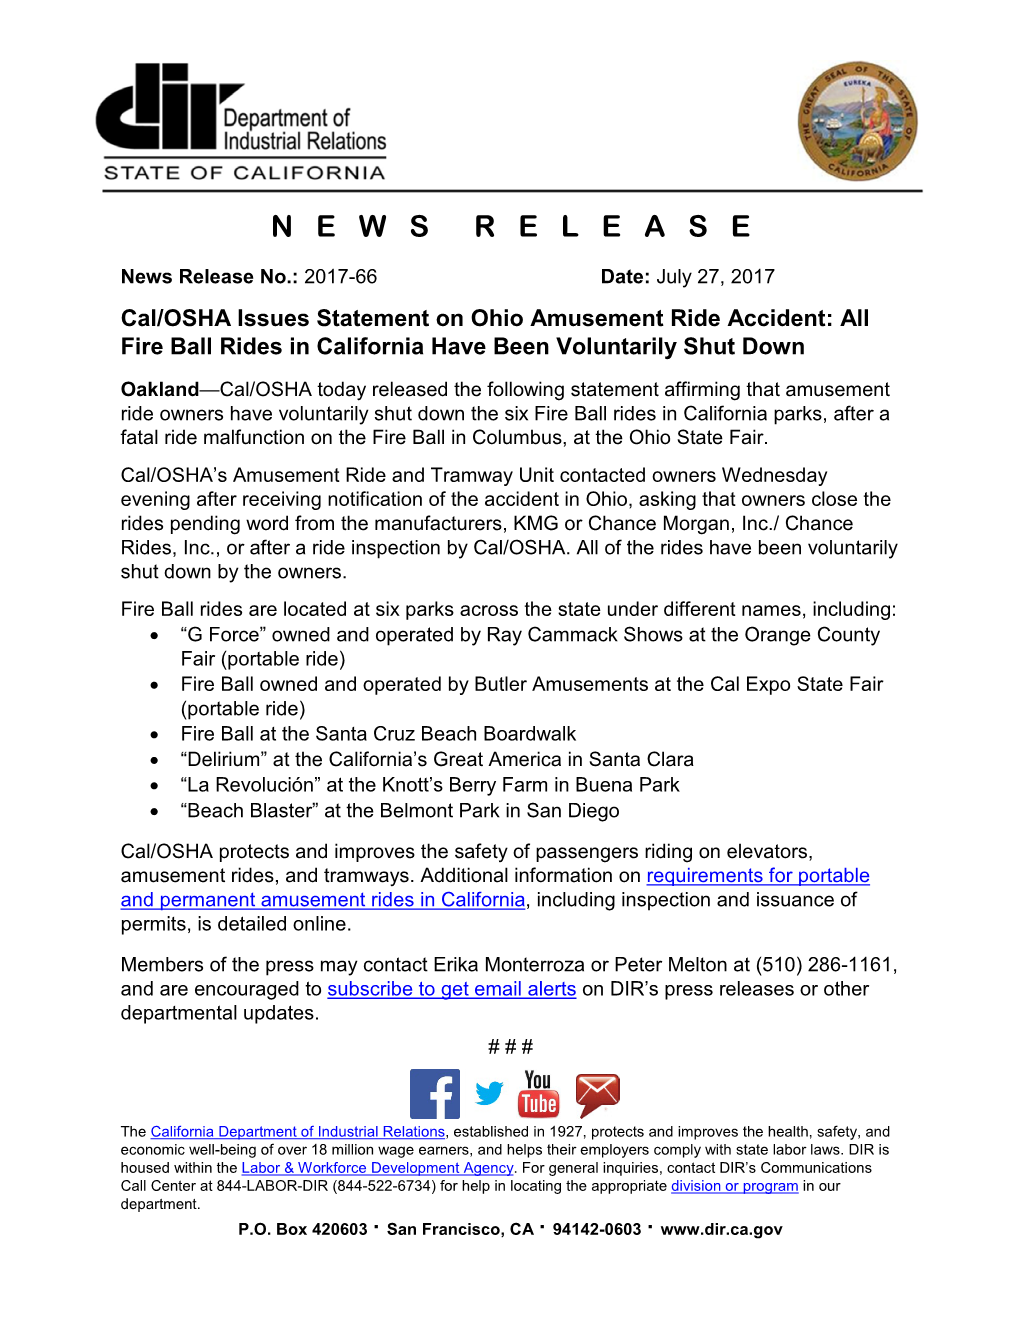 Cal/OSHA Issues Statement on Ohio Amusement Ride Accident: All Fire Ball Rides in California Have Been Voluntarily Shut Down